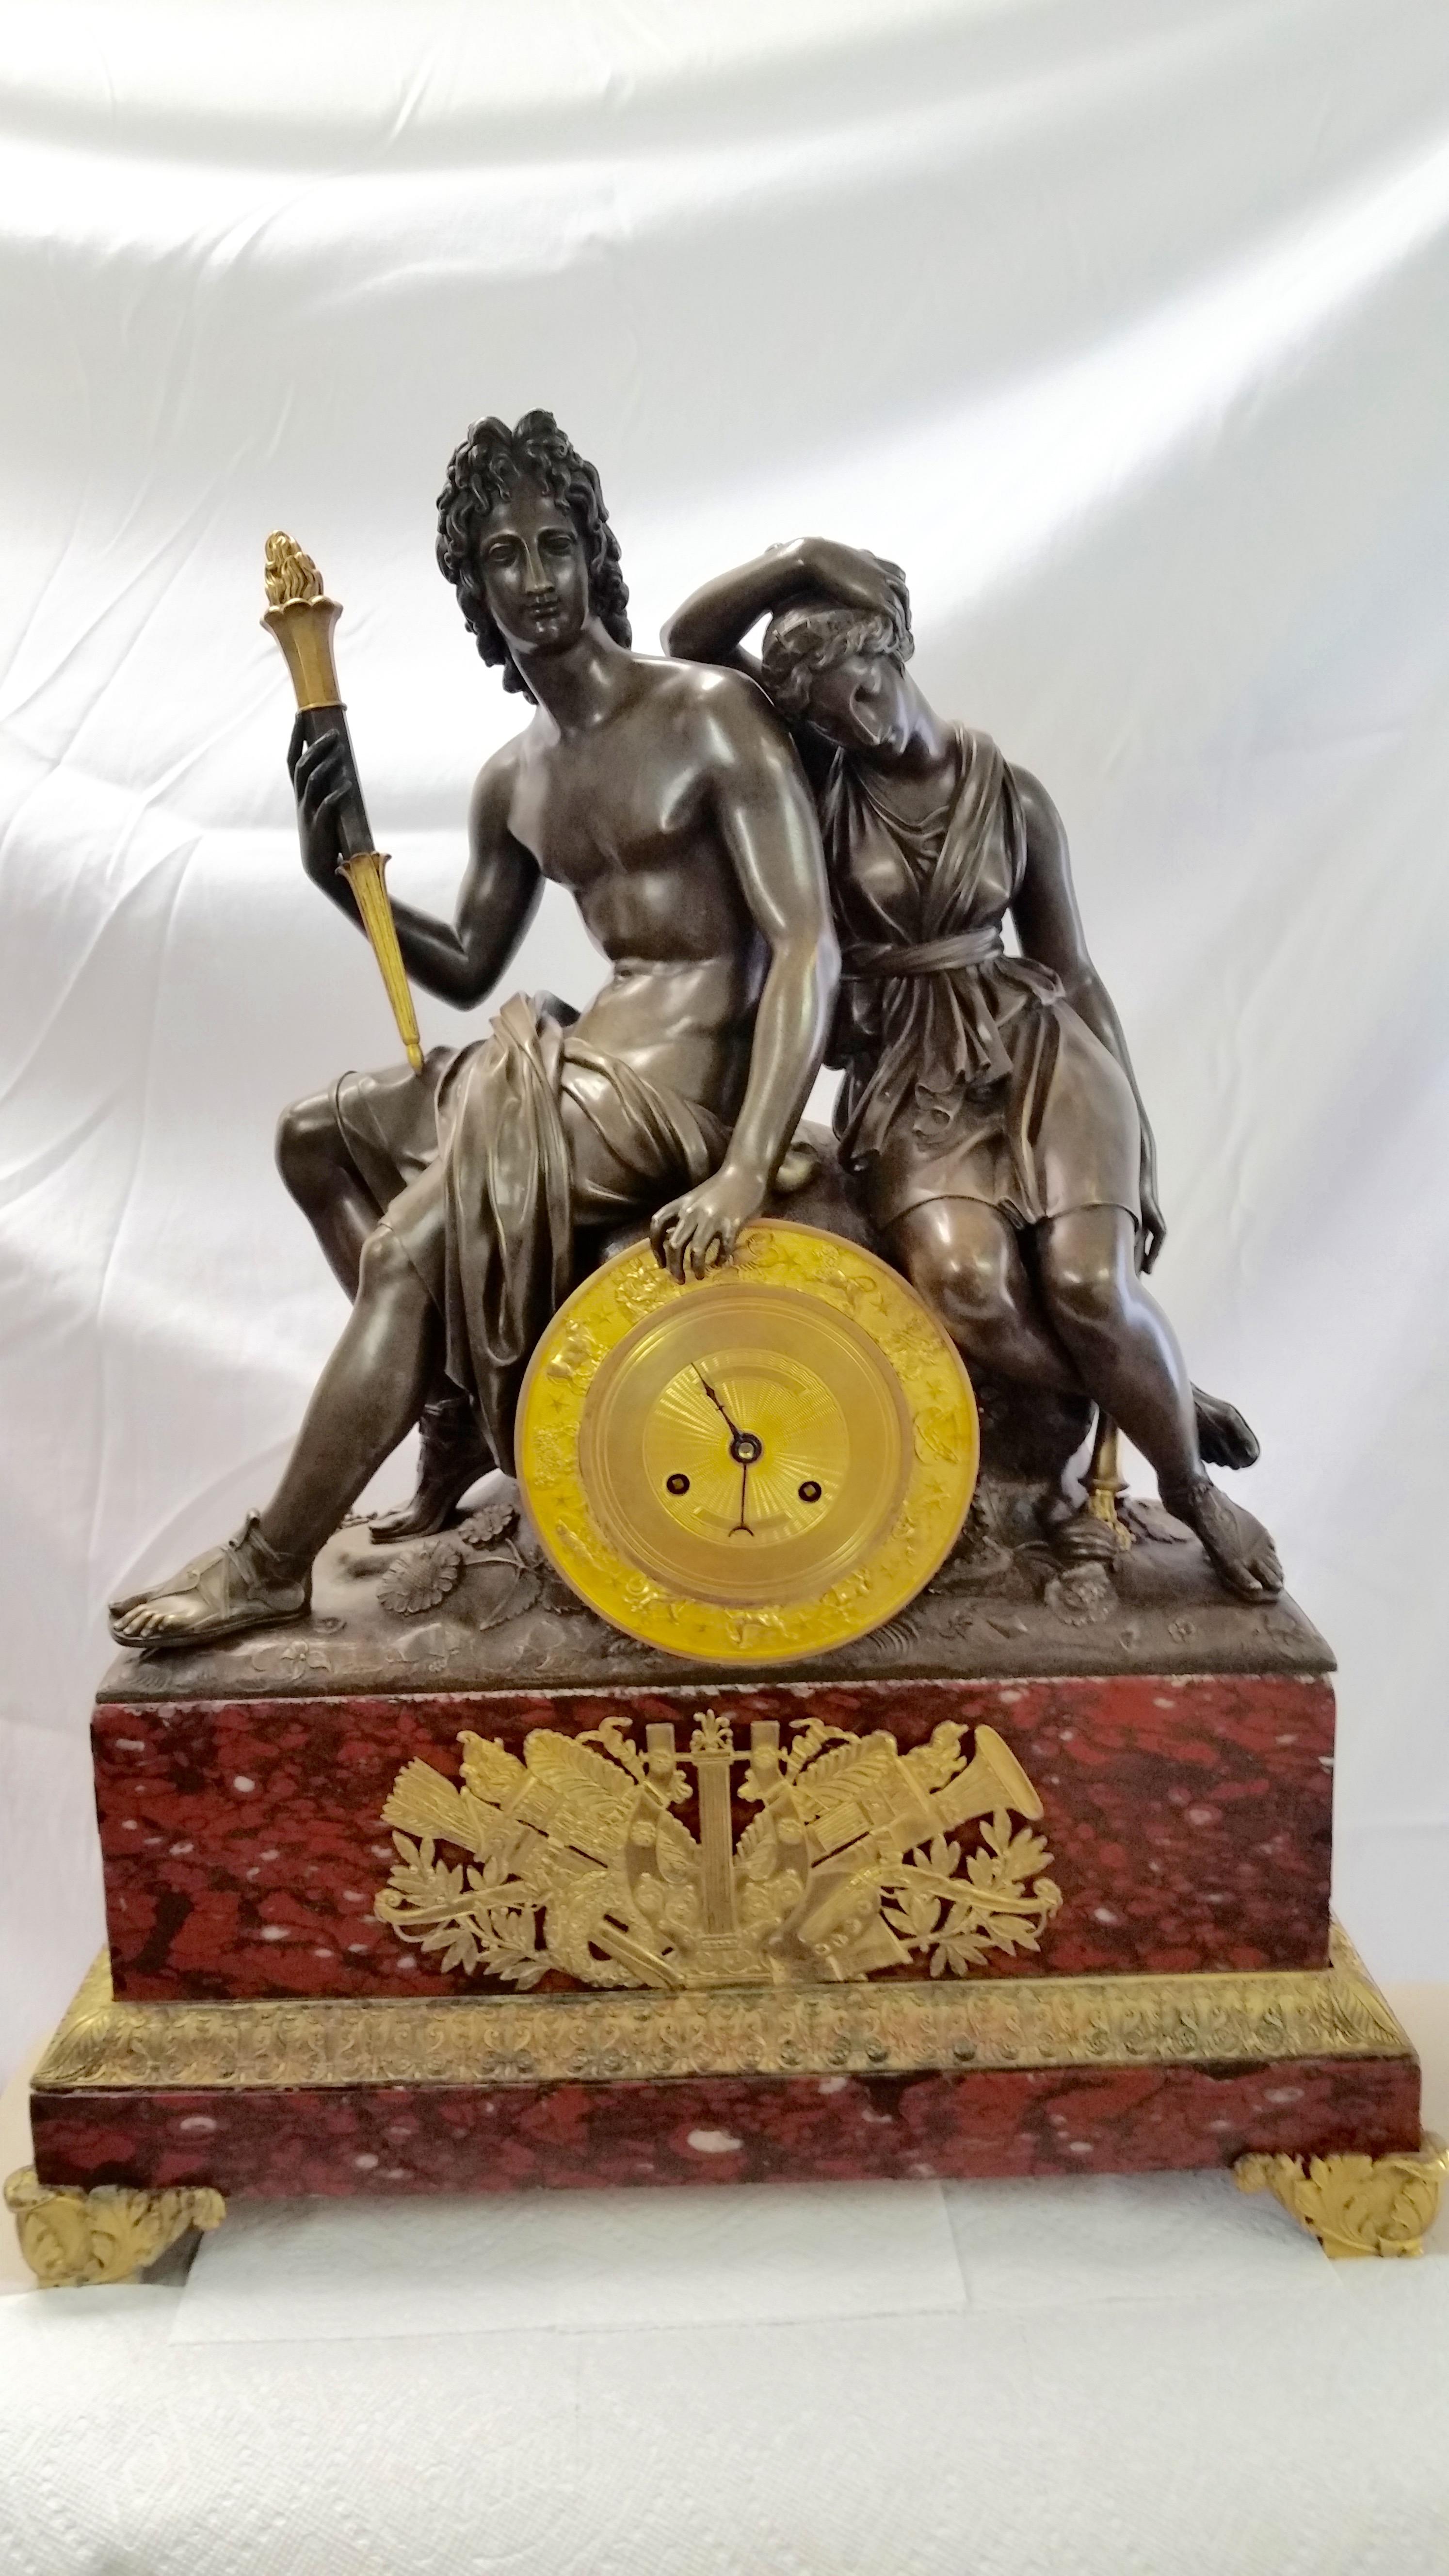 Exceptional French Empire period bronze and red Languedoc marble clock of the highest quality. Fantastic casting details down to the toe nails. Retains original patina to bronze and doré finished portions. Clock movement appears to be original and